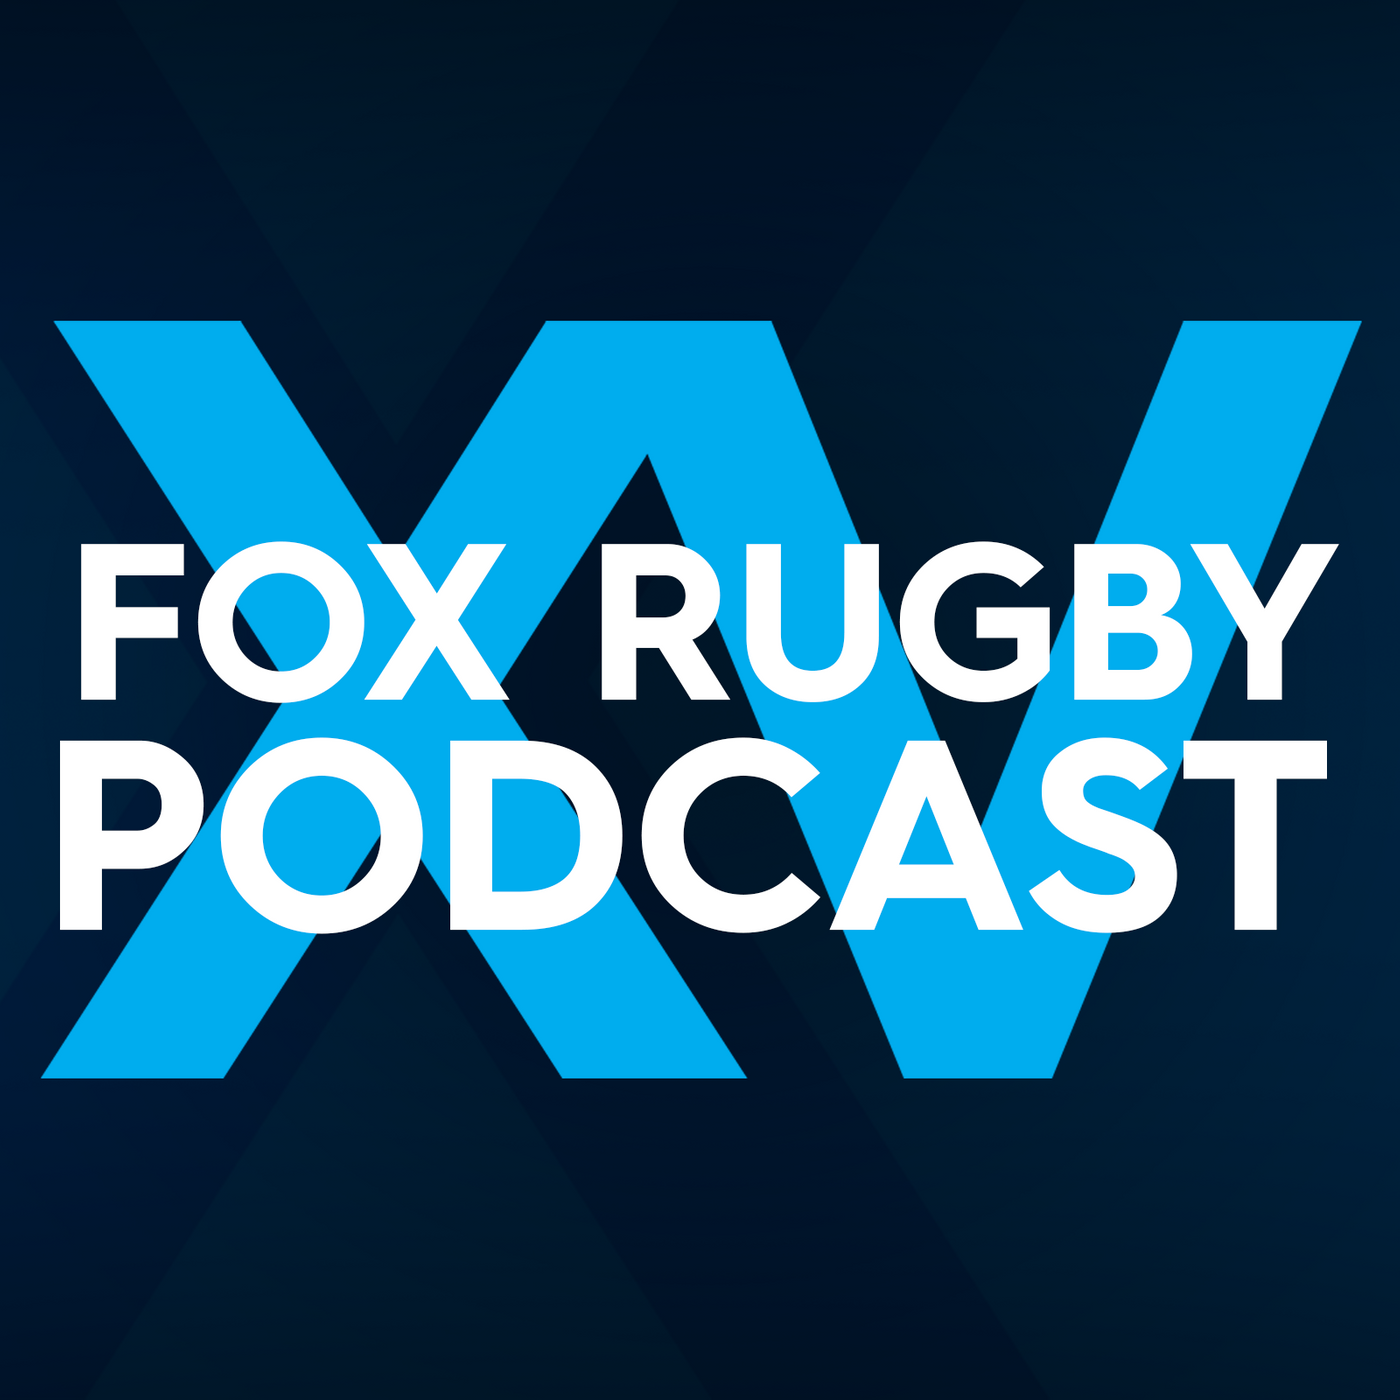 MATT TO’OMUA & TIM HORAN | Short and Sharp chat with Matt To’omua in Wallabies camp | Bledisloe Preview | Life in quarantine | Who’s impressed? | Life under the new regime